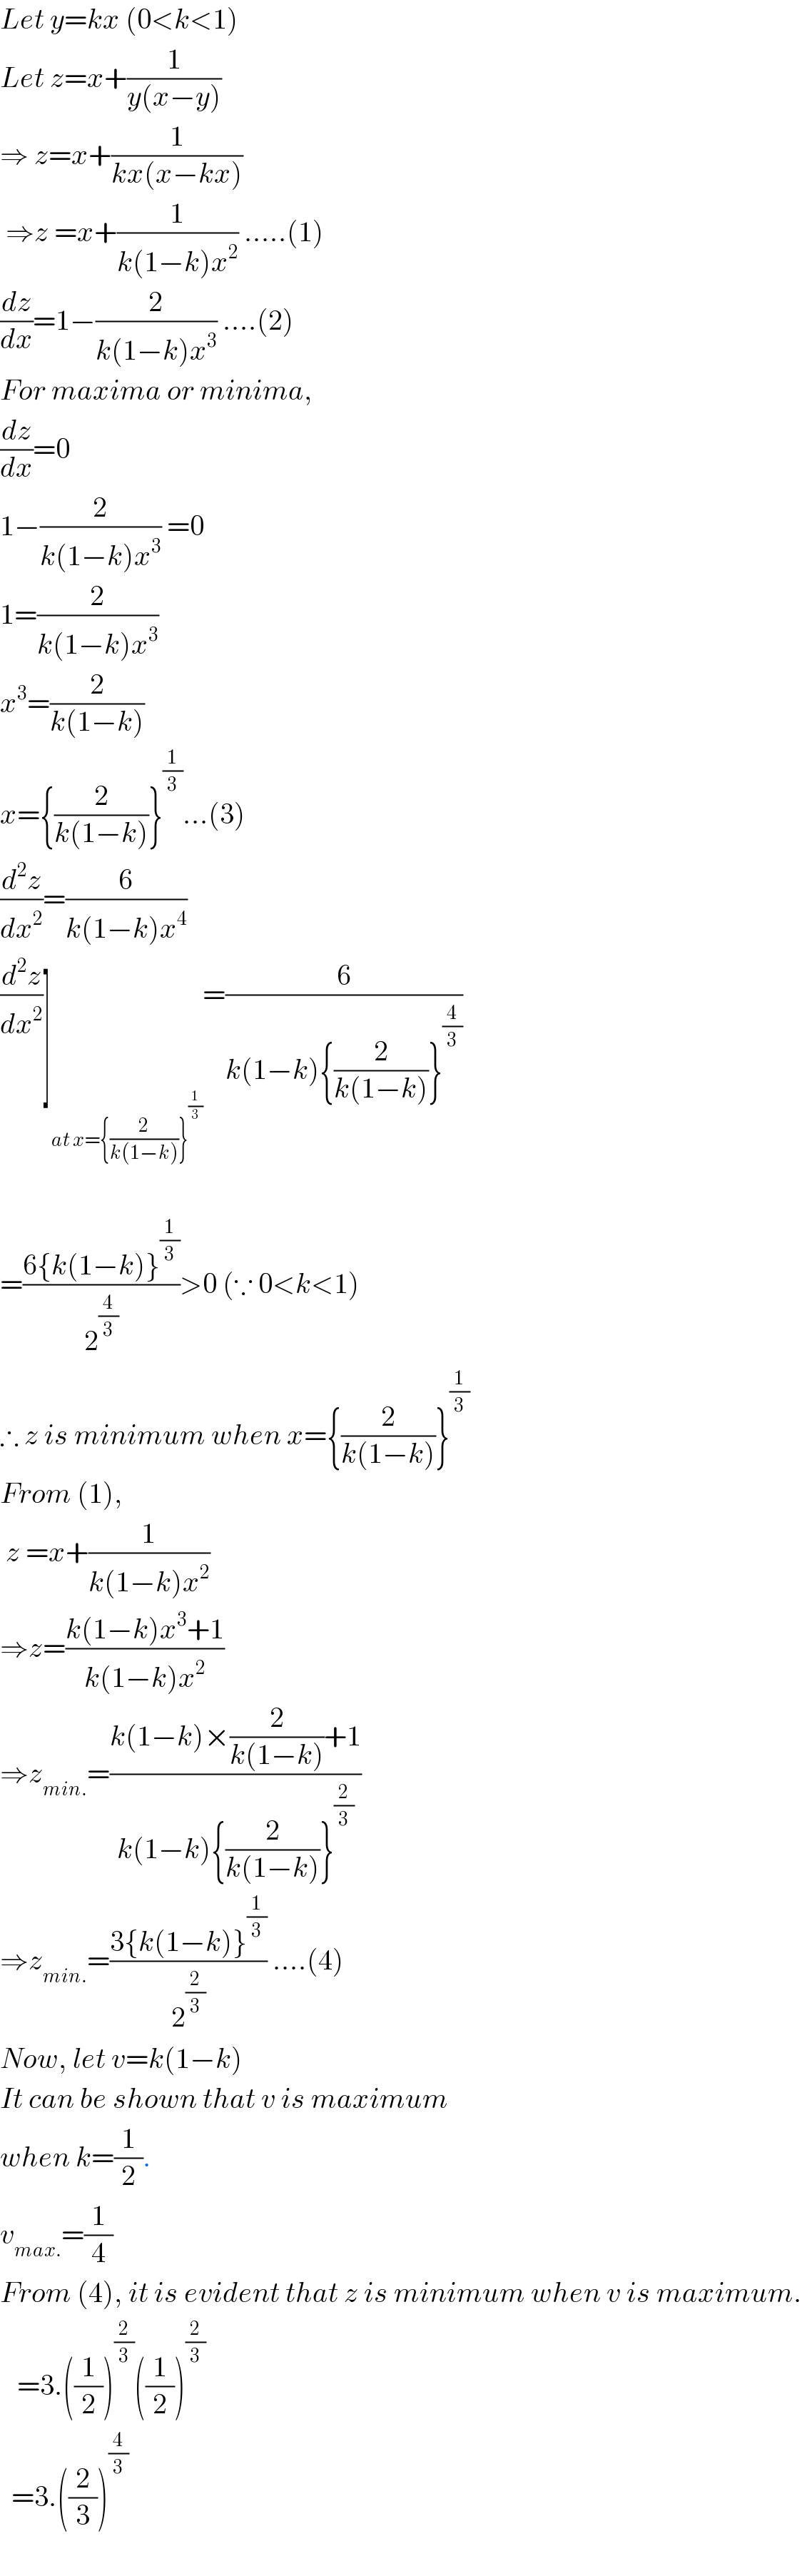 Let y=kx (0<k<1)  Let z=x+(1/(y(x−y)))  ⇒ z=x+(1/(kx(x−kx)))   ⇒z =x+(1/(k(1−k)x^2 )) .....(1)  (dz/dx)=1−(2/(k(1−k)x^3 )) ....(2)  For maxima or minima,  (dz/dx)=0  1−(2/(k(1−k)x^3 )) =0  1=(2/(k(1−k)x^3 ))   x^3 =(2/(k(1−k)))    x={(2/(k(1−k)))}^(1/3) ...(3)    (d^2 z/dx^2 )=(6/(k(1−k)x^4 ))  (d^2 z/dx^2 )]_(at x={(2/(k(1−k)))}^(1/3) ) =(6/(k(1−k){(2/(k(1−k)))}^(4/3) ))    =((6{k(1−k)}^(1/3) )/2^(4/3) )>0 (∵ 0<k<1)  ∴ z is minimum when x={(2/(k(1−k)))}^(1/3)   From (1),   z =x+(1/(k(1−k)x^2 ))   ⇒z=((k(1−k)x^3 +1)/(k(1−k)x^2 ))  ⇒z_(min.) =((k(1−k)×(2/(k(1−k)))+1)/(k(1−k){(2/(k(1−k)))}^(2/3) ))  ⇒z_(min.) =((3{k(1−k)}^(1/3) )/2^(2/3) ) ....(4)  Now, let v=k(1−k)  It can be shown that v is maximum  when k=(1/2).  v_(max.) =(1/4)  From (4), it is evident that z is minimum when v is maximum.     =3.((1/2))^(2/3) ((1/2))^(2/3)     =3.((2/3))^(4/3)     